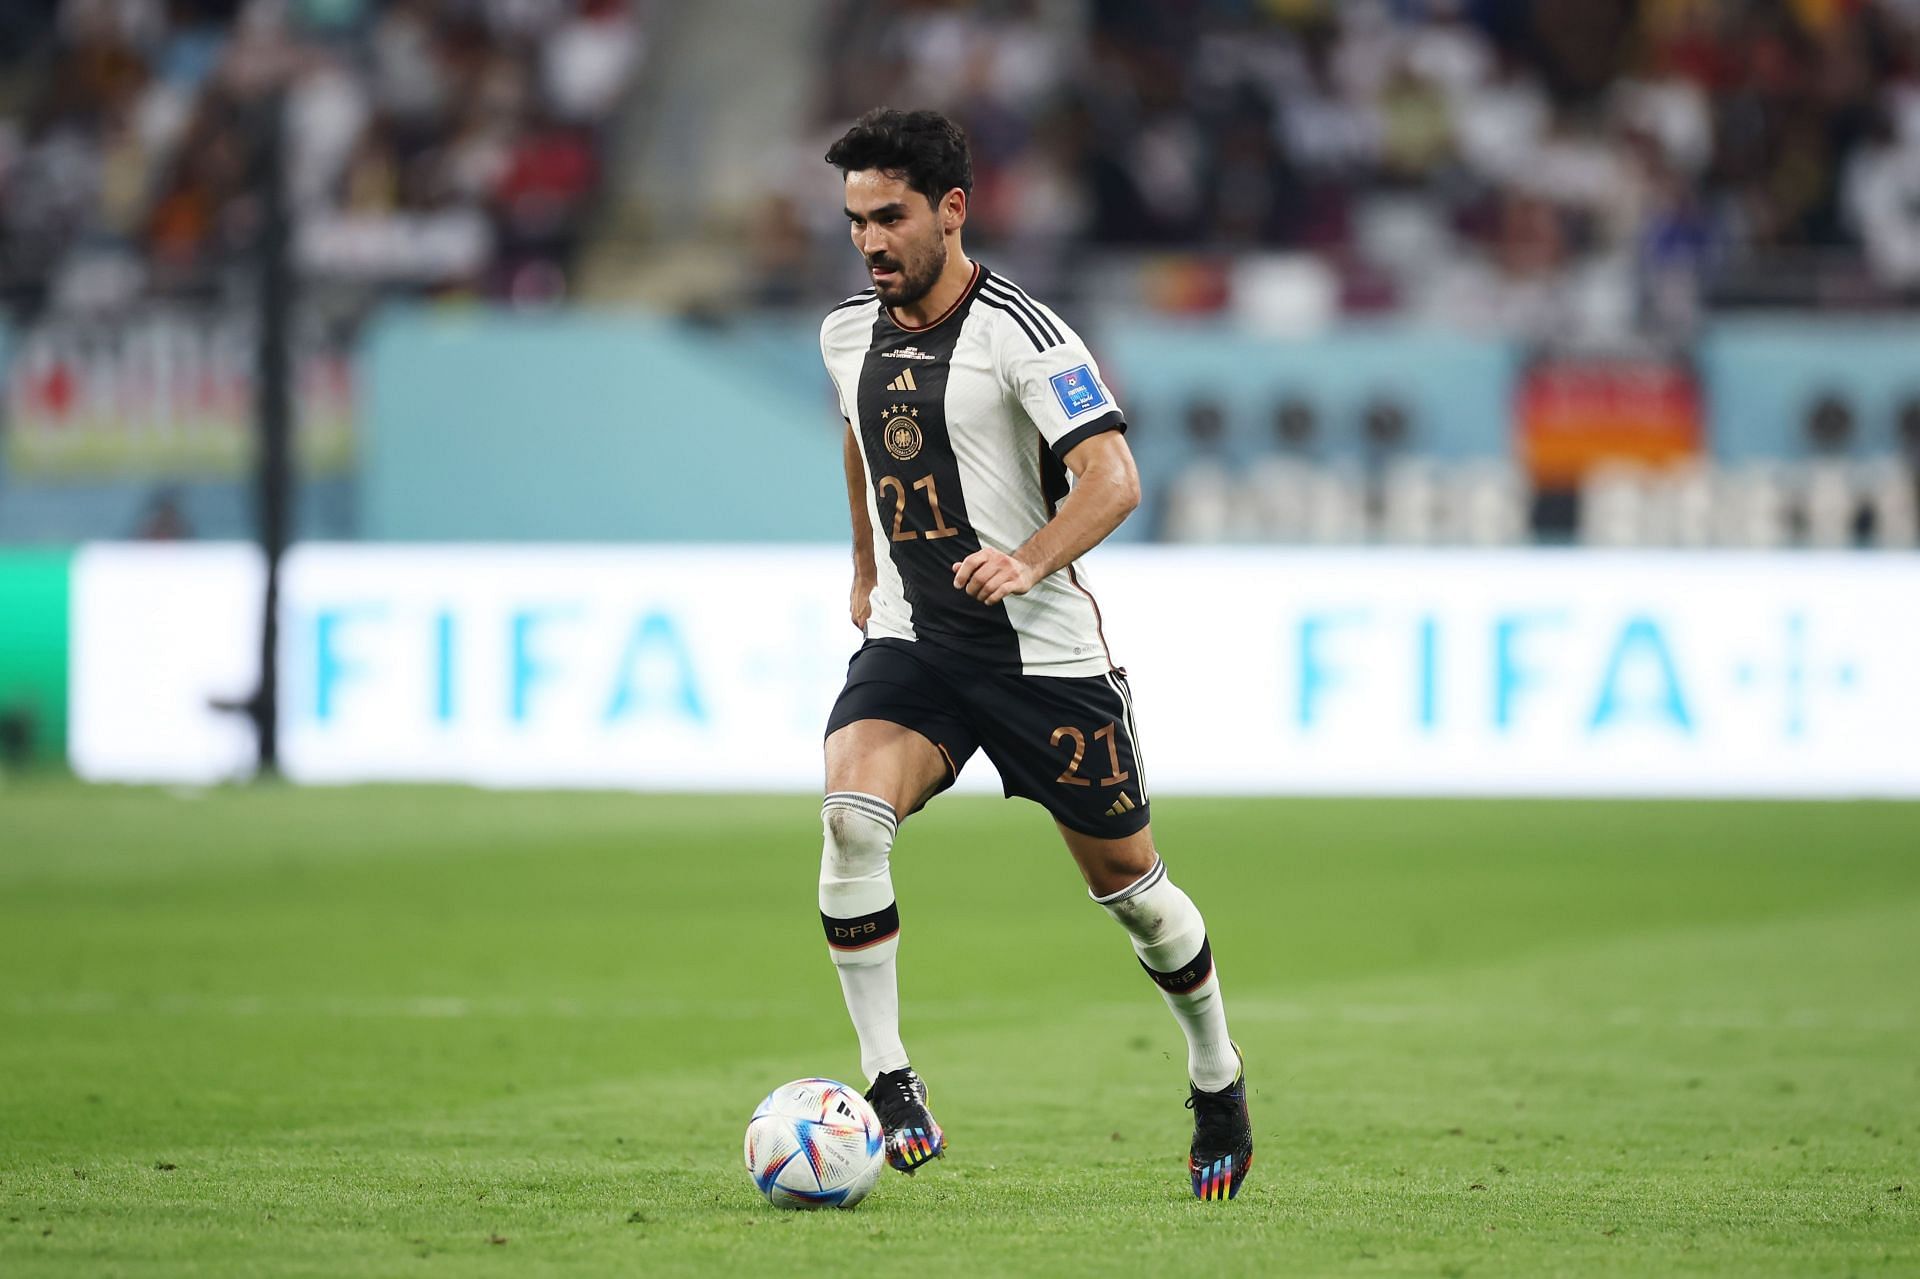 Gundogan opened the scoring for Germany with a well-taken penalty